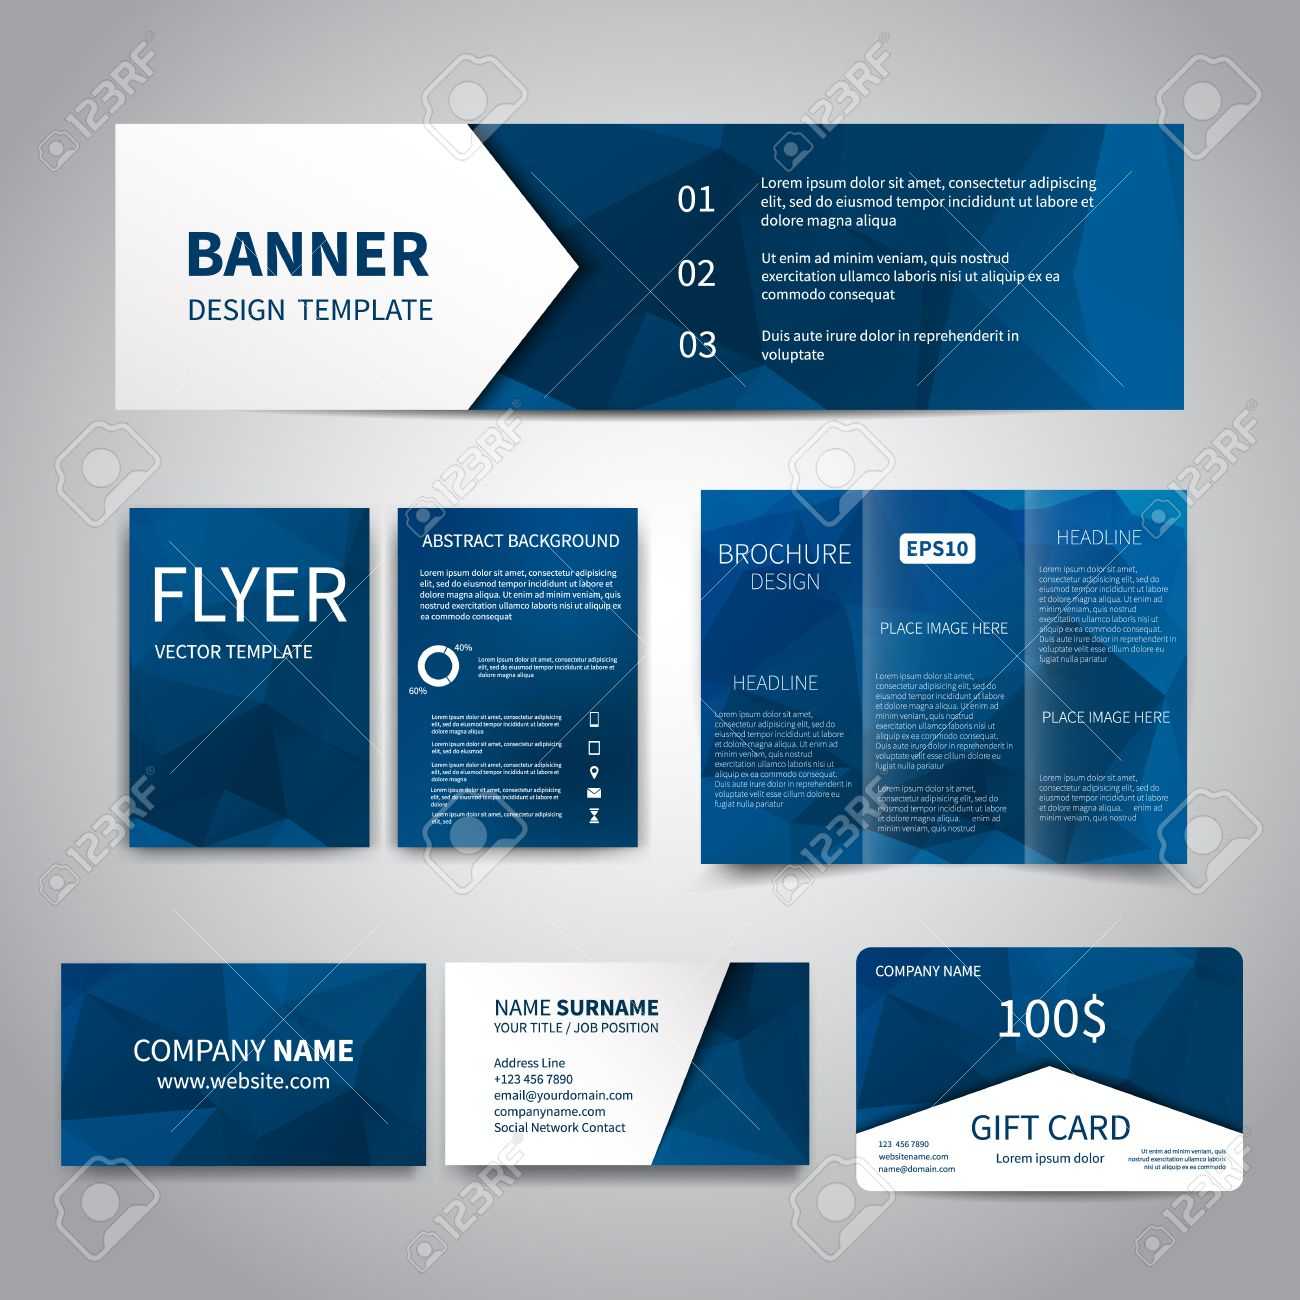 Advertising Cards Templates – Atlantaauctionco Within Advertising Cards Templates